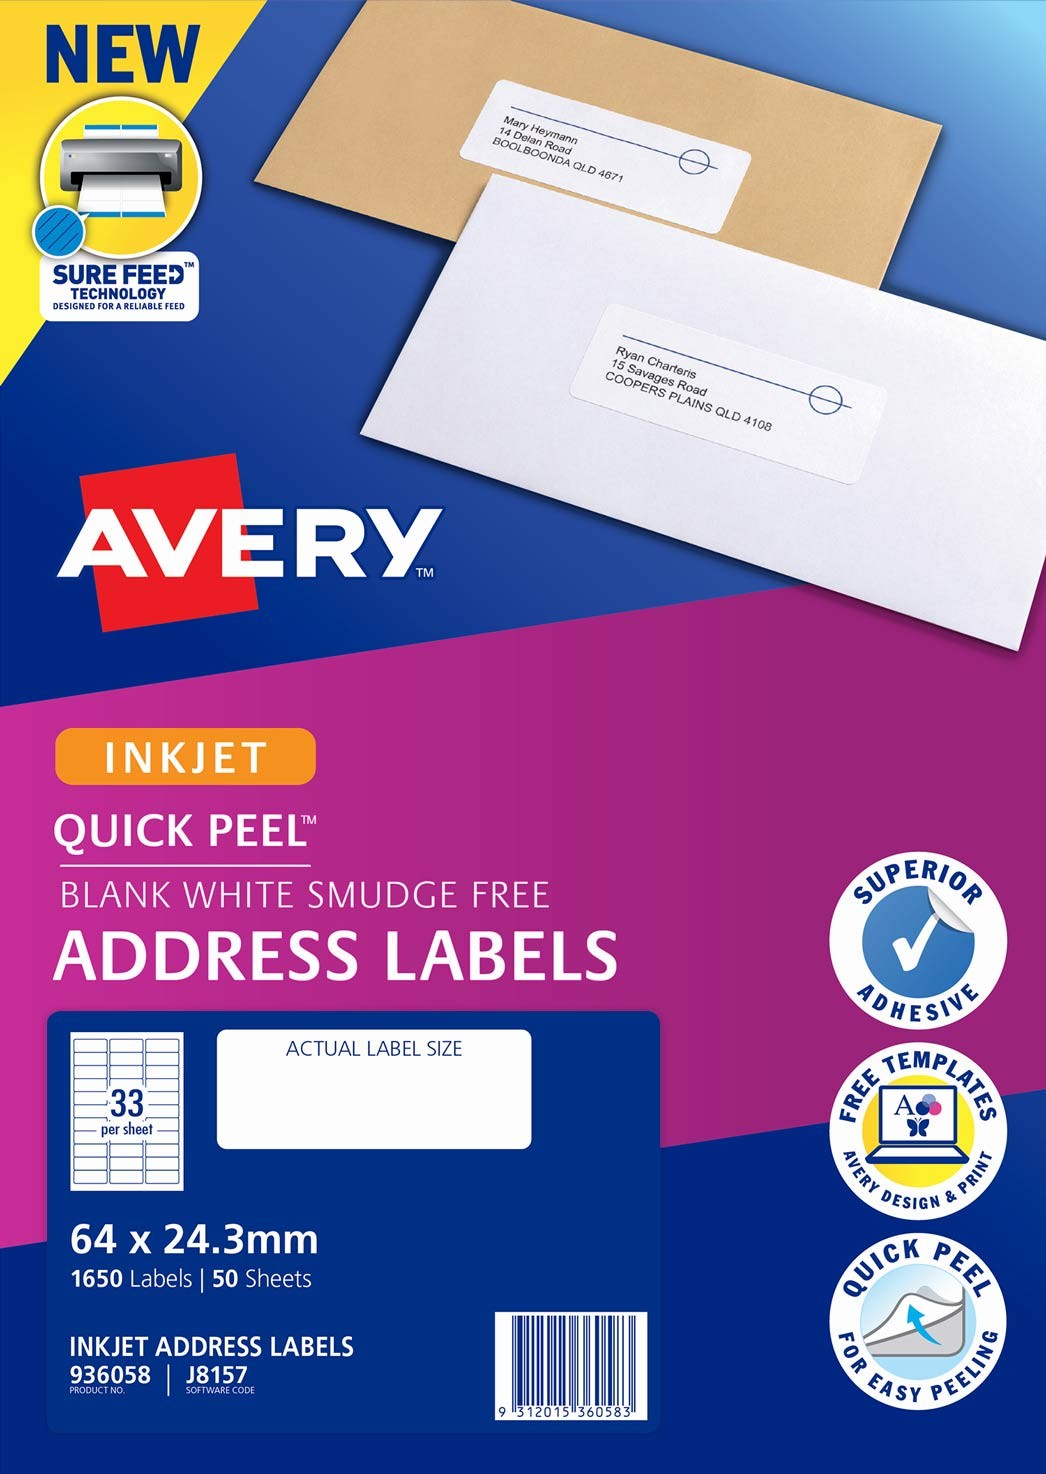 avery labels software download free